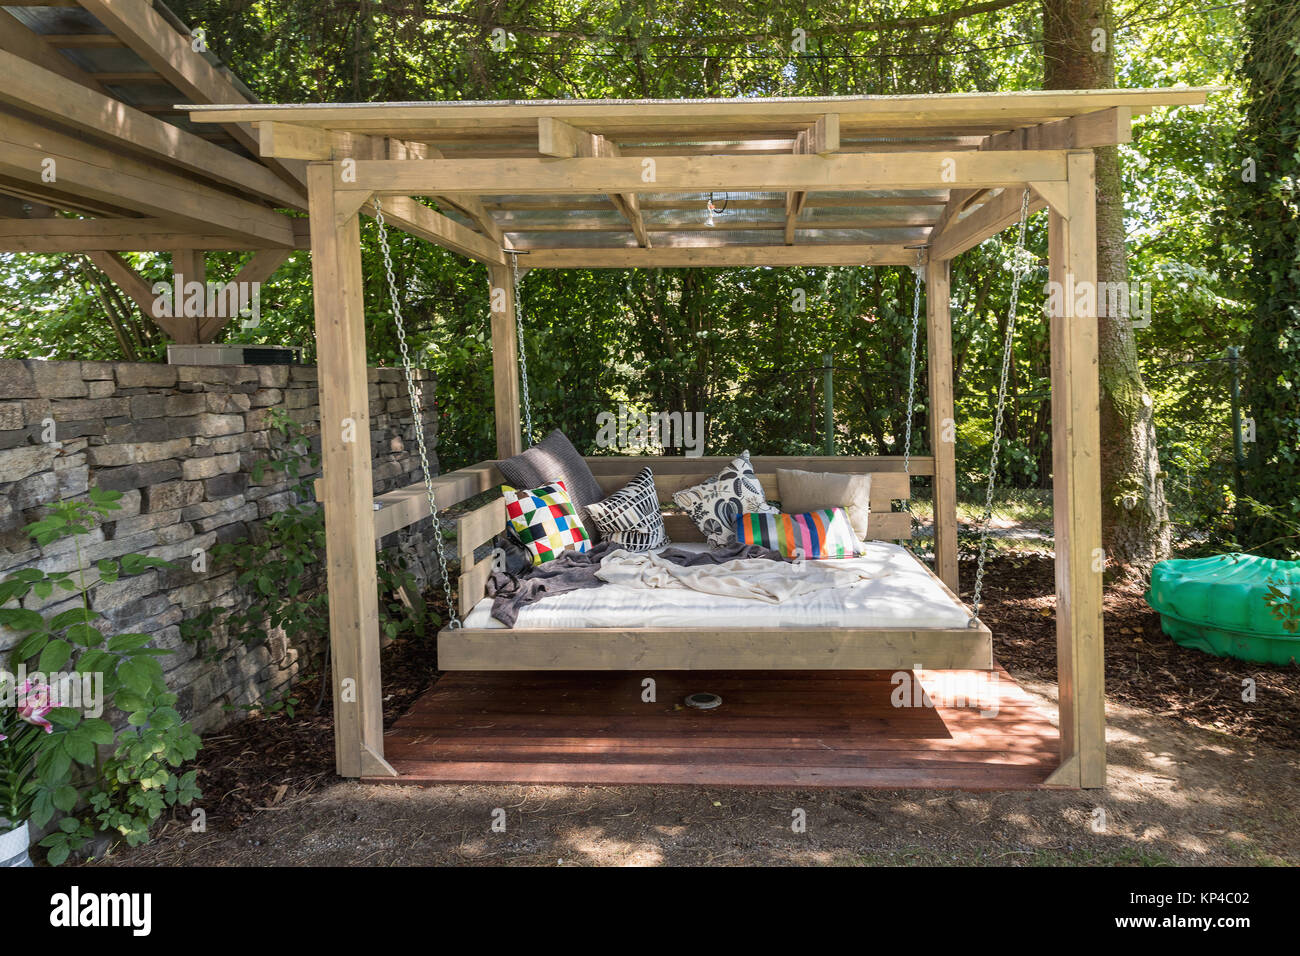 Big Swing Outdoor Bed Chaise Longue In The Garden In The Pergola Garden Bed With Pillows Big Outdoor Bed For Sunbathing And Rest Four Garden Bed Stock Photo Alamy